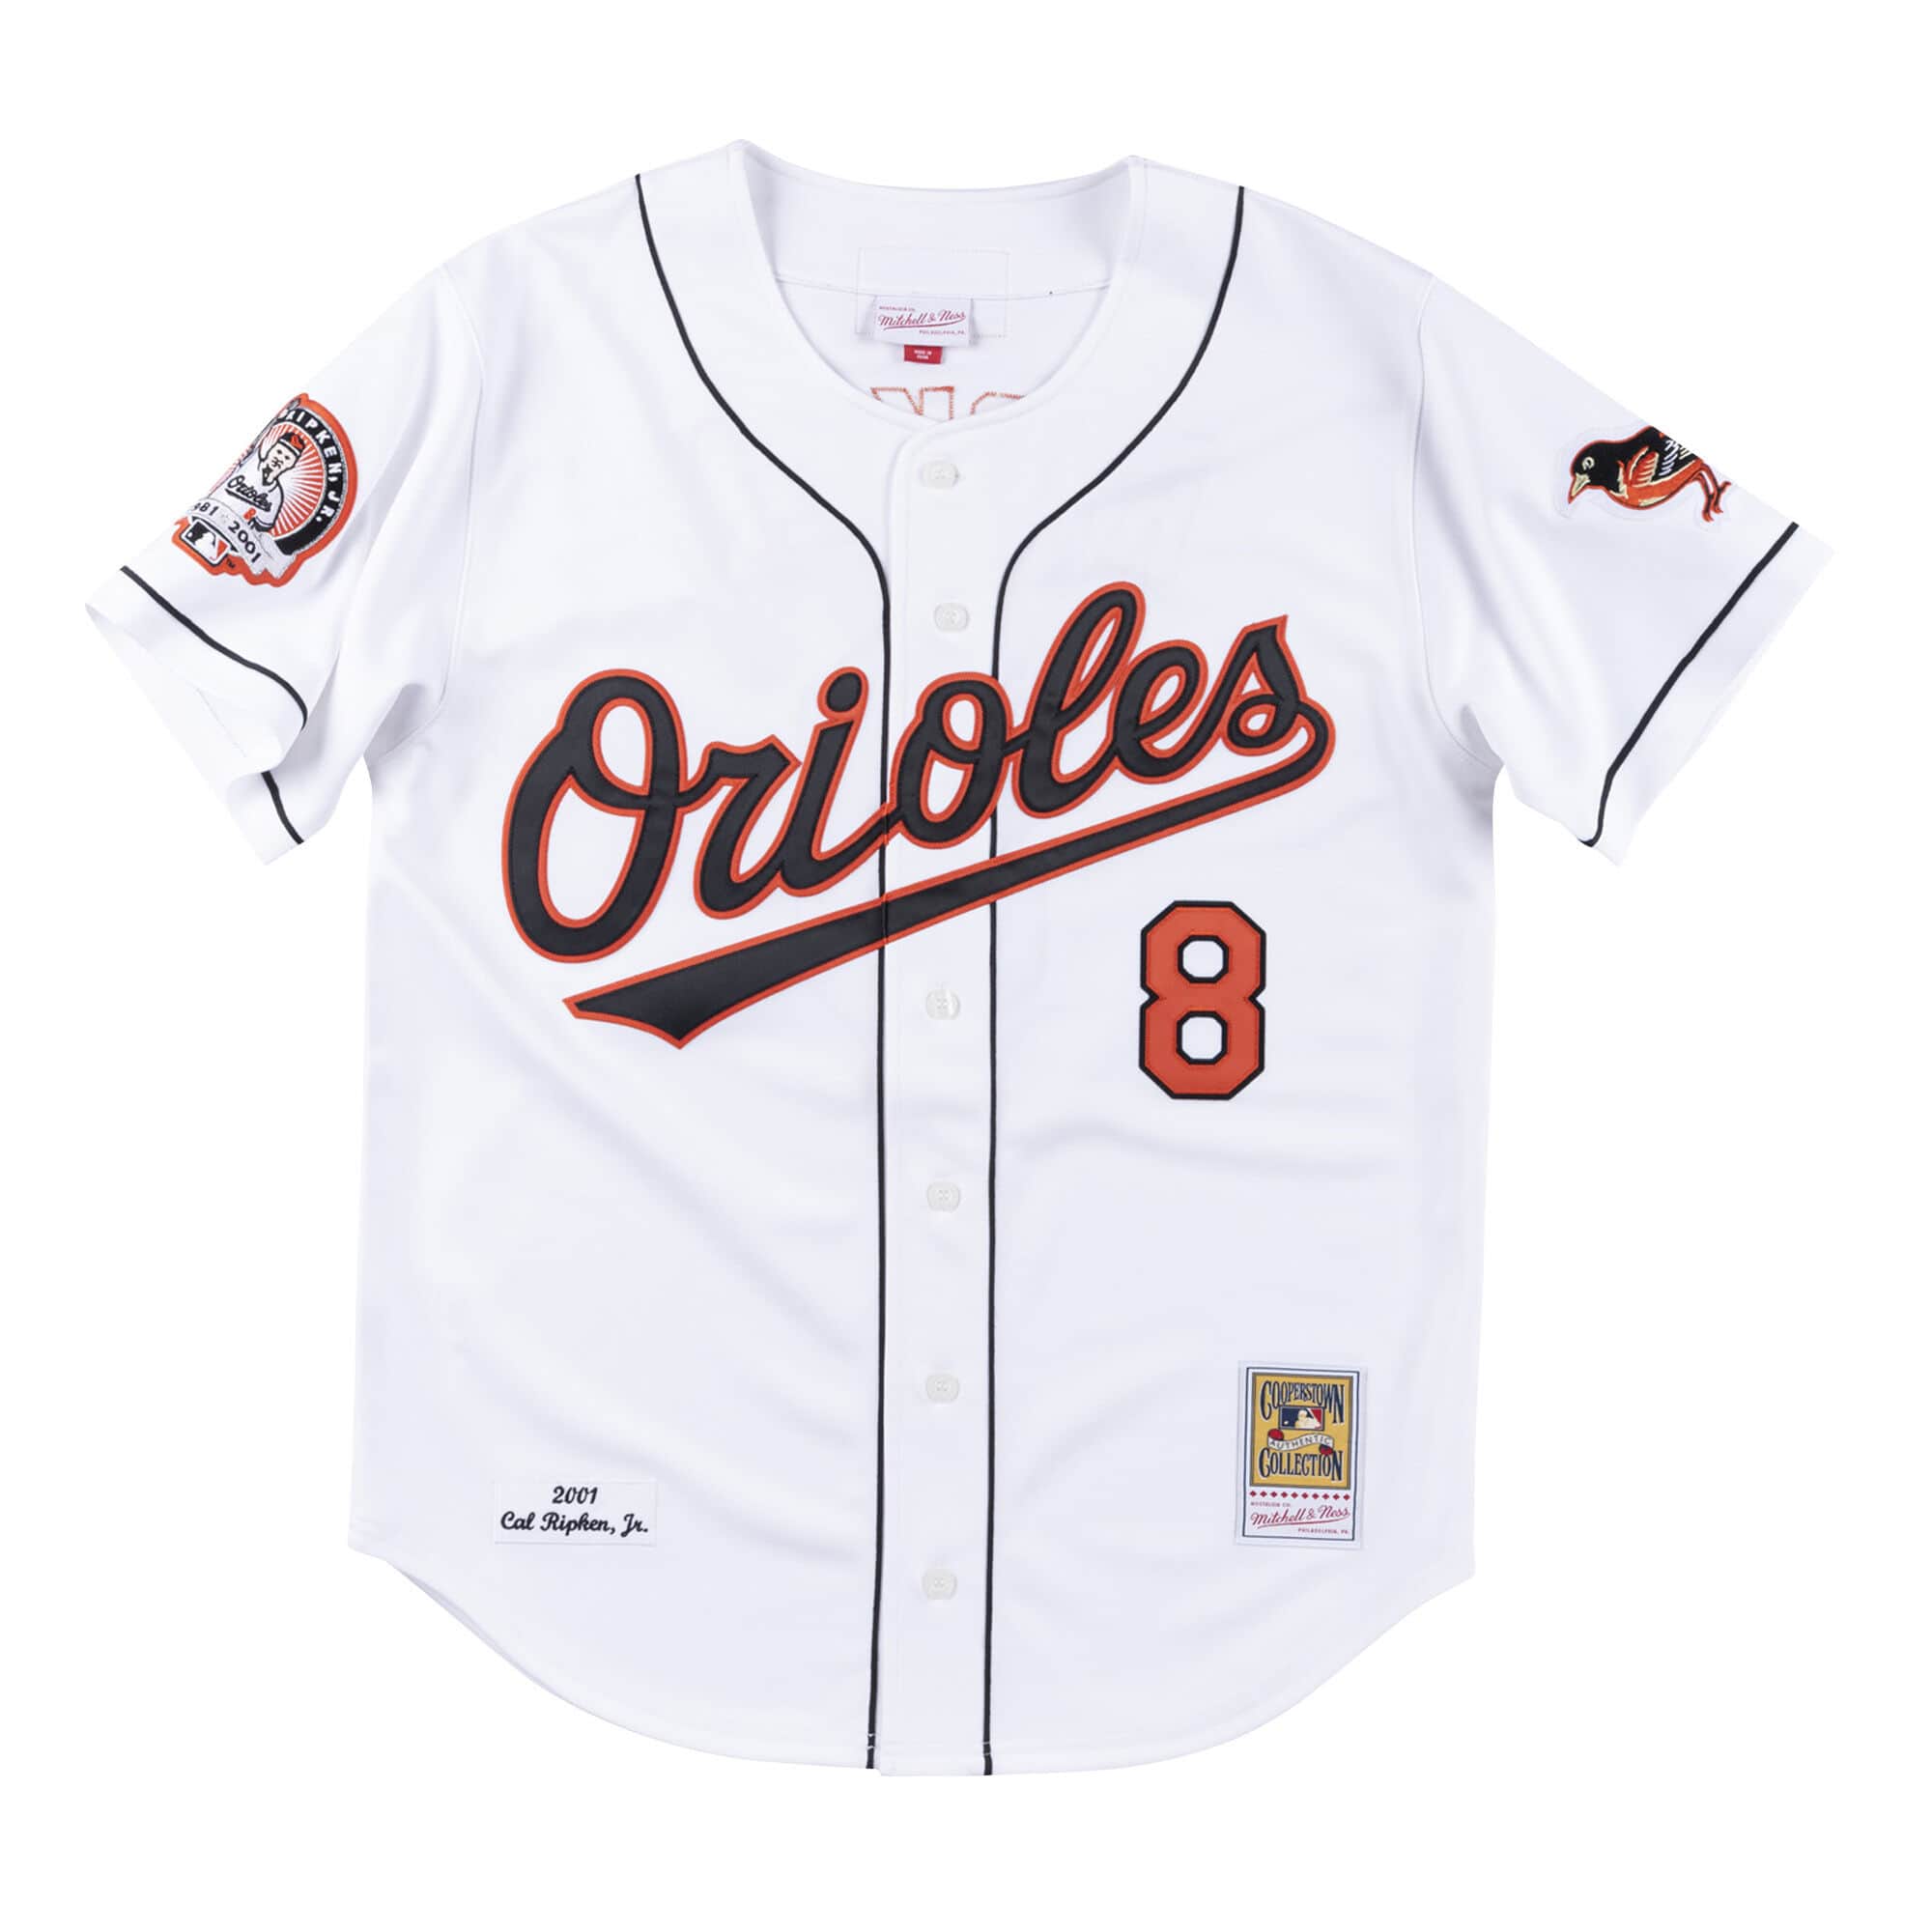 Mitchell & Ness MLB Authentic JERSEY-pullover - Baltimore Orioles -MENS- Orange/Black S